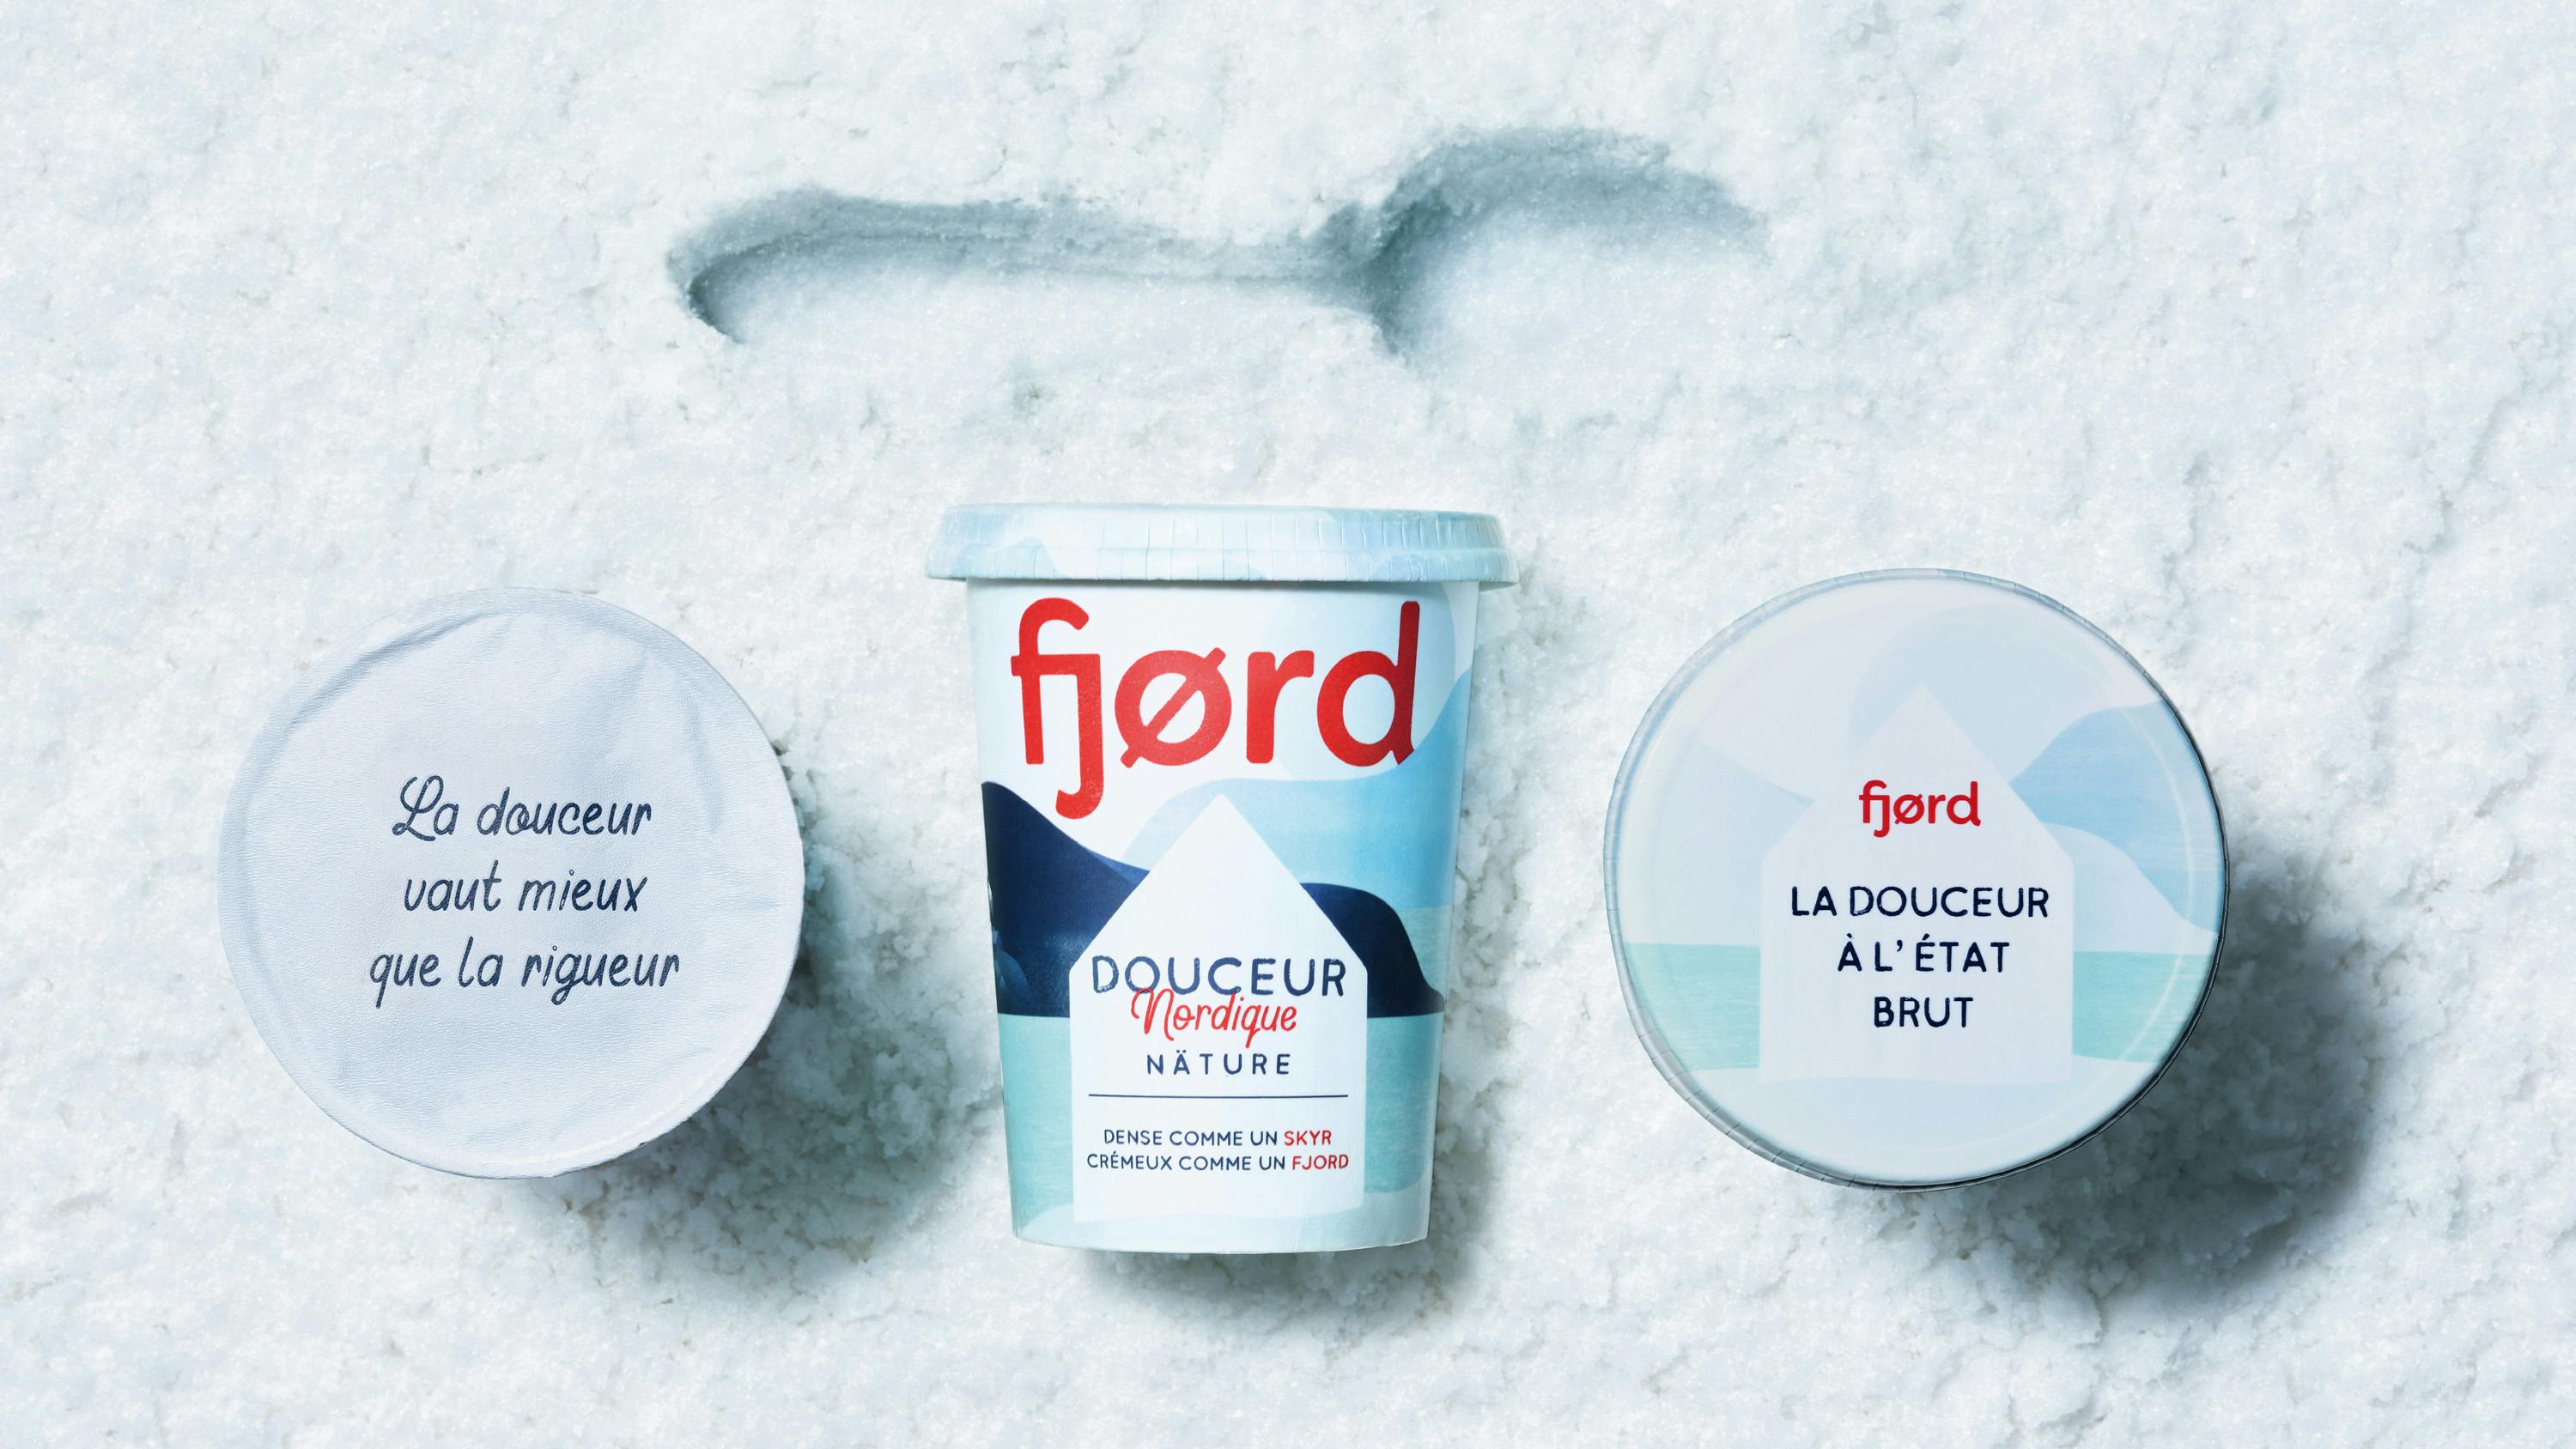 Danone Fjord Label and Lid